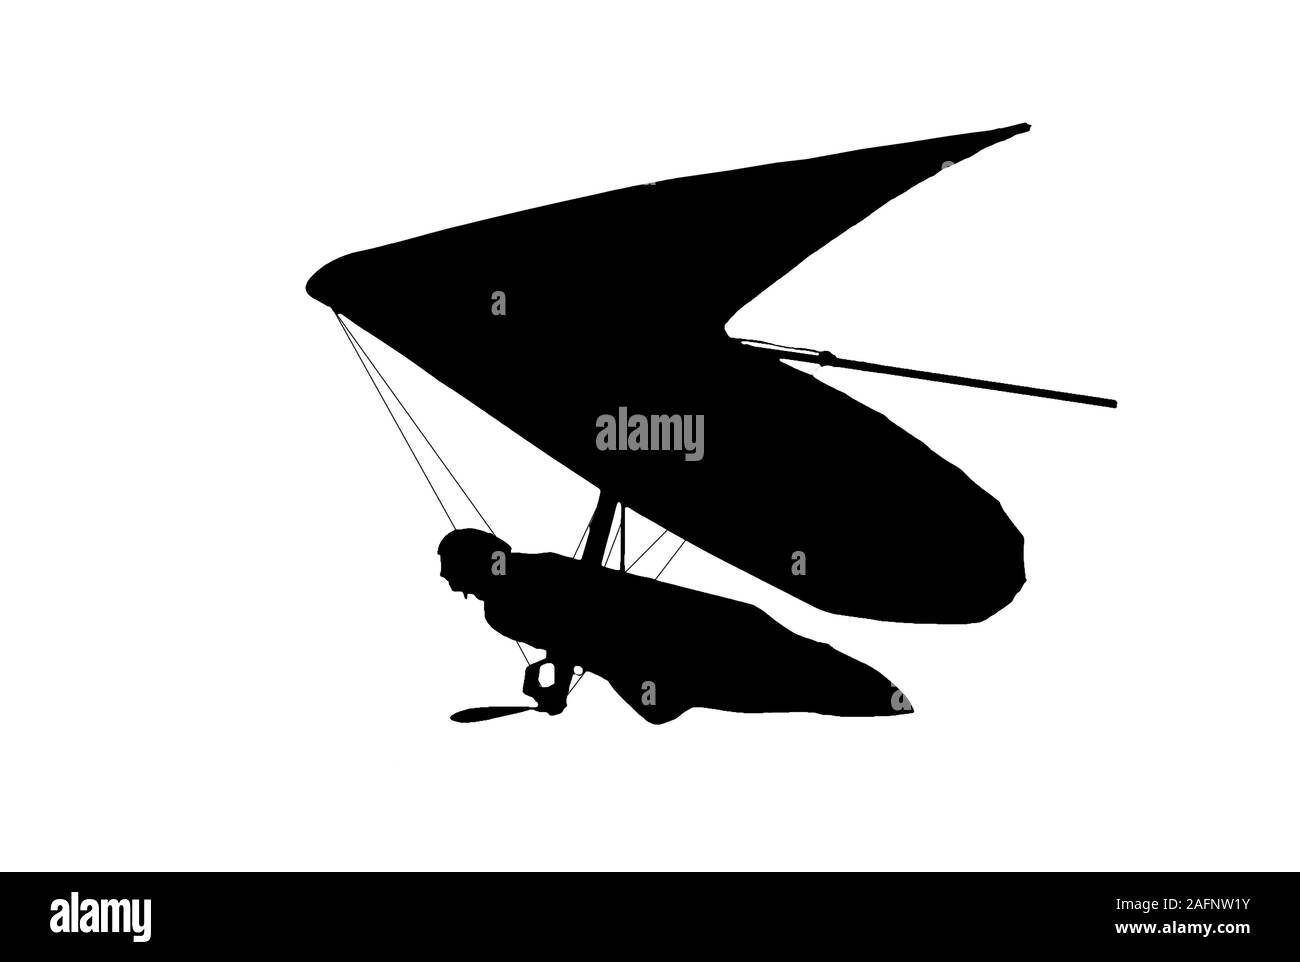 Hang glider wing silhouette isolated on white with clipping path. Template for extreme sport logo, sign, drawing Stock Photo